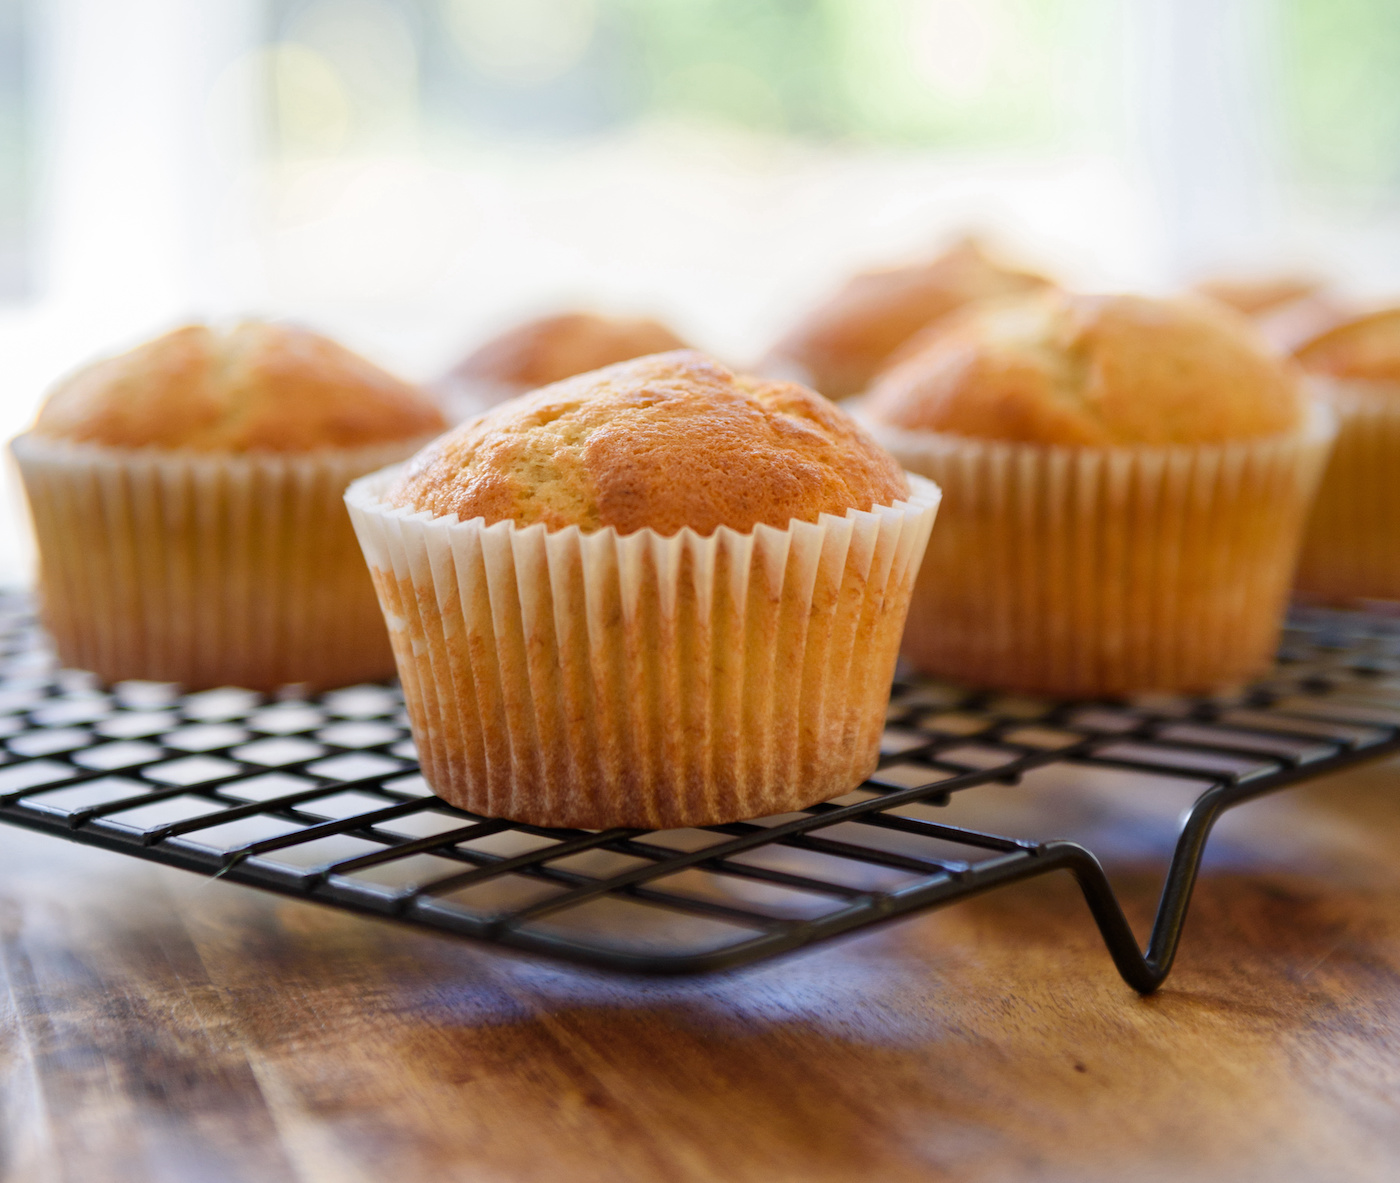 Undecorated plain cupcakes cooling on wire cake rack, selective focus